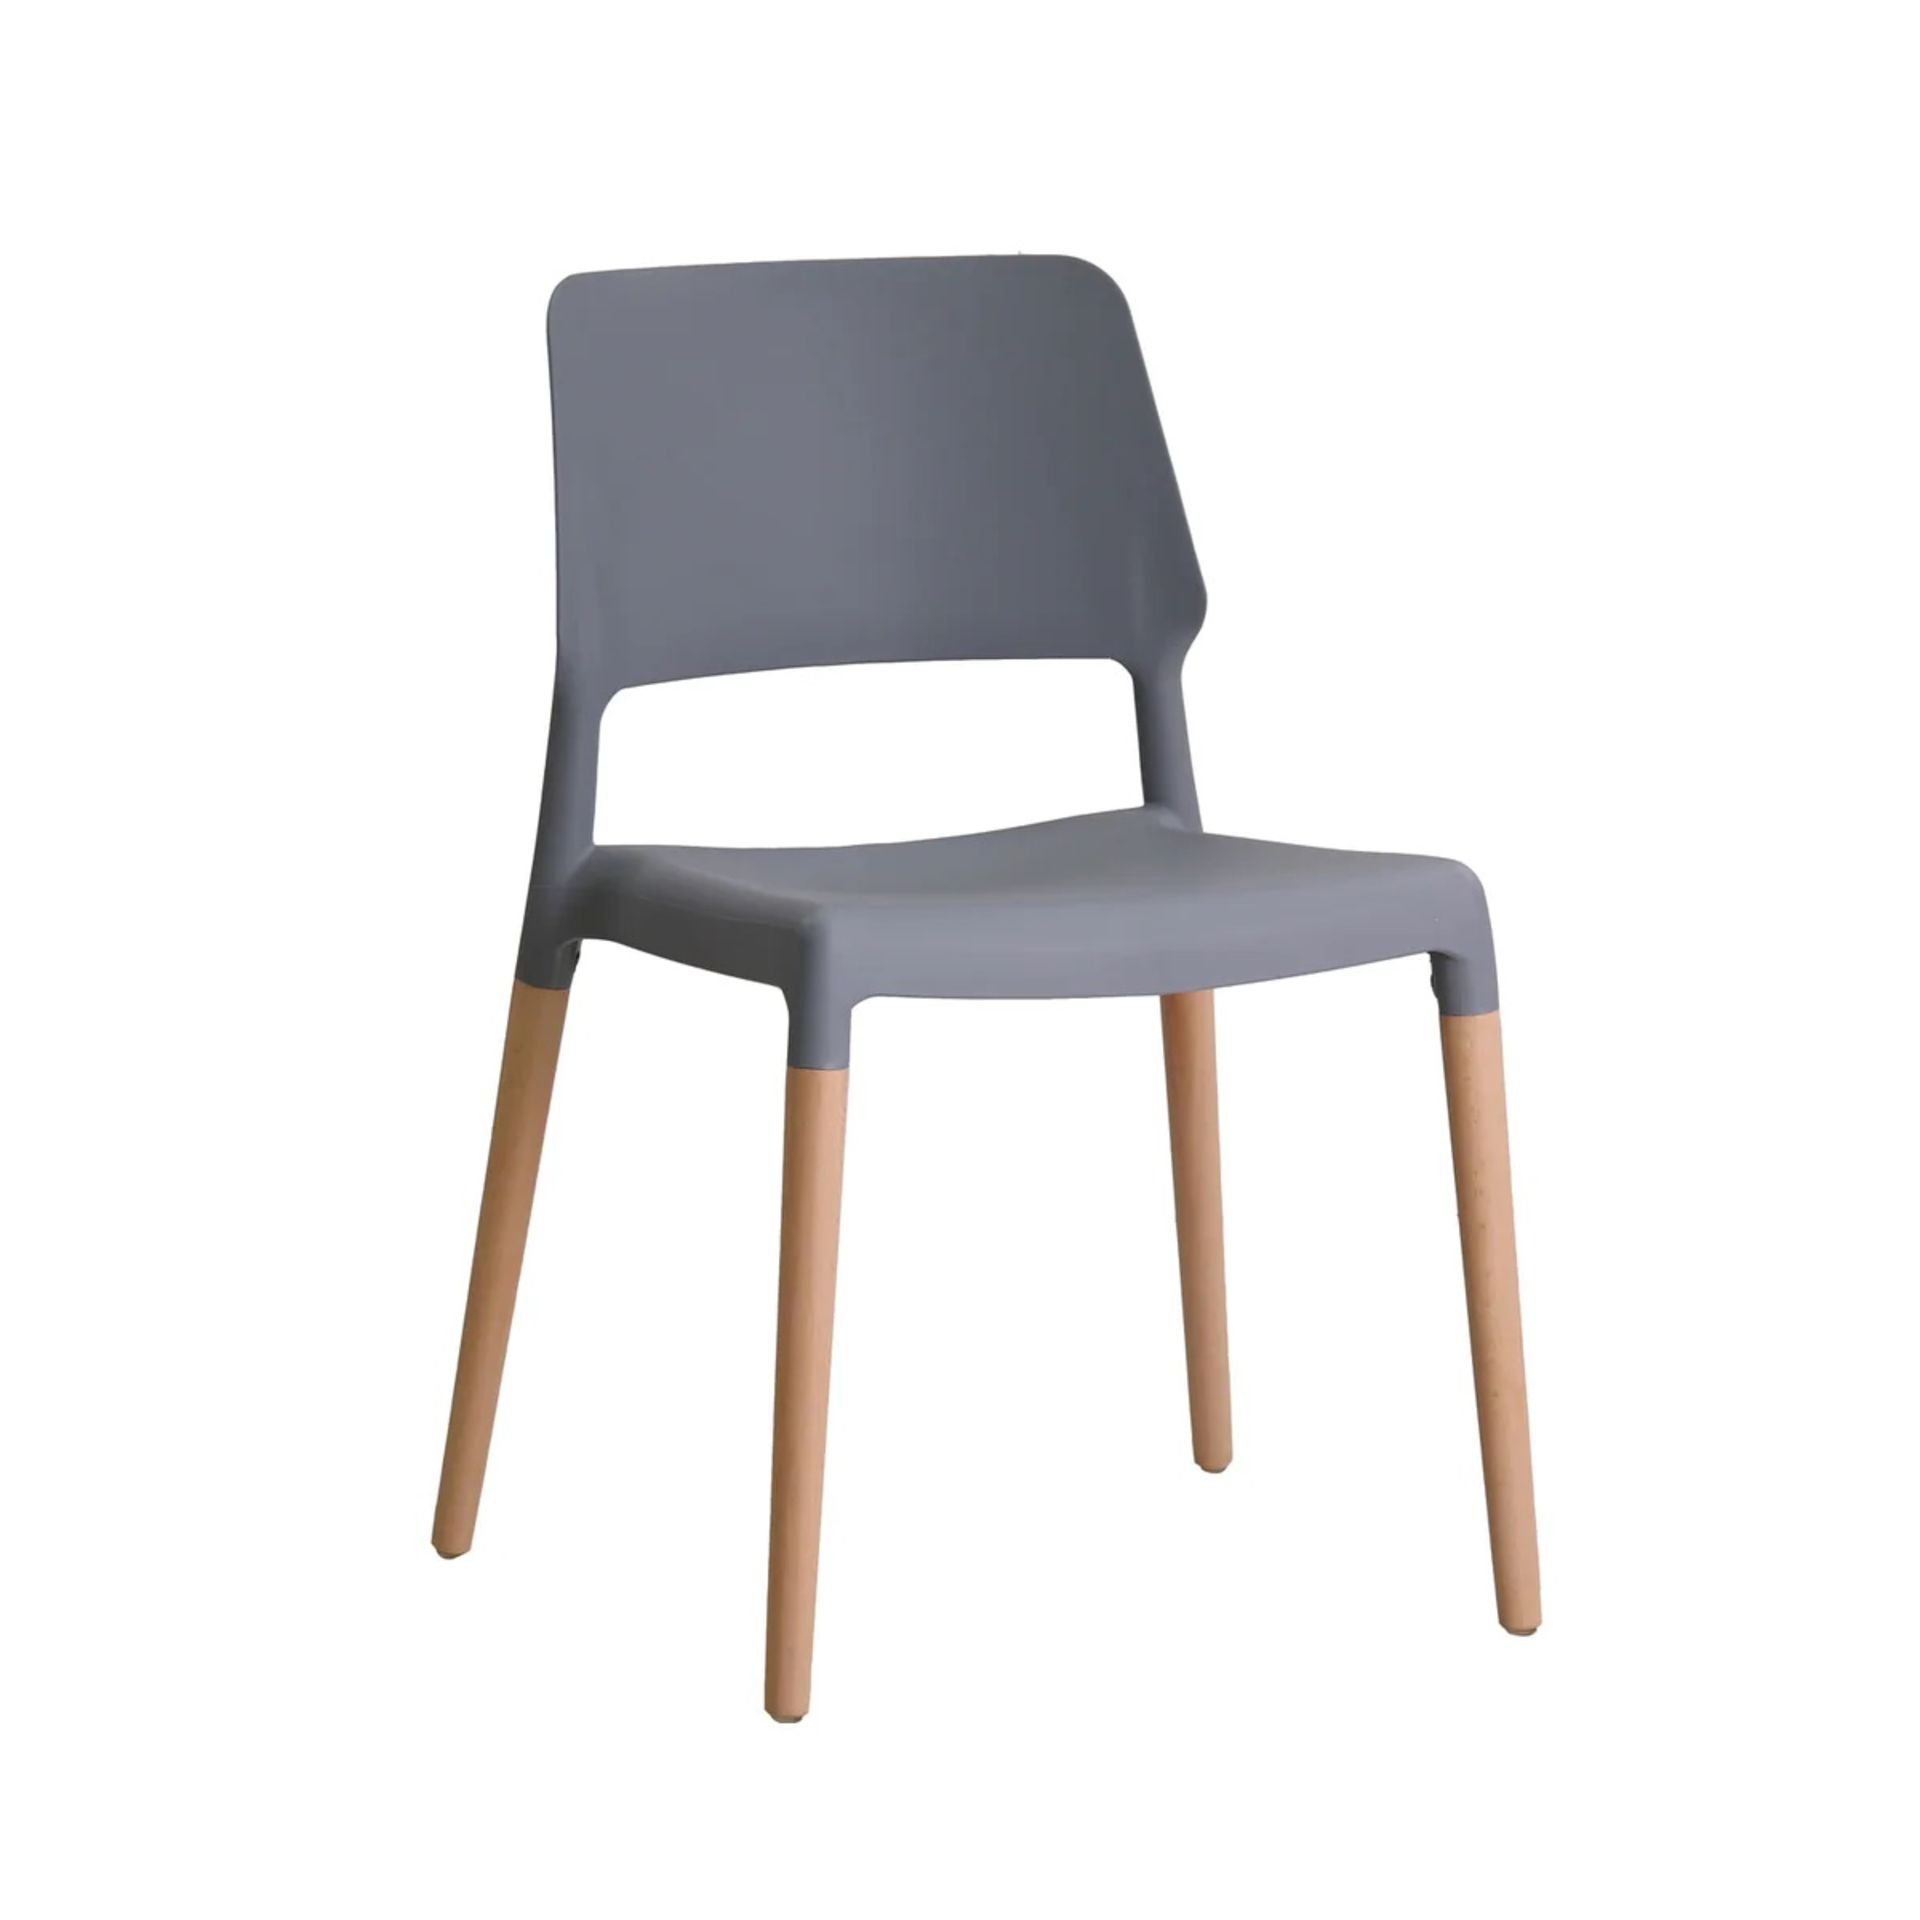 RIVA PAIR OF DINING CHAIRS IN GREY DURABLE PLASTIC - RRP £159 PER PAIR - Image 2 of 3